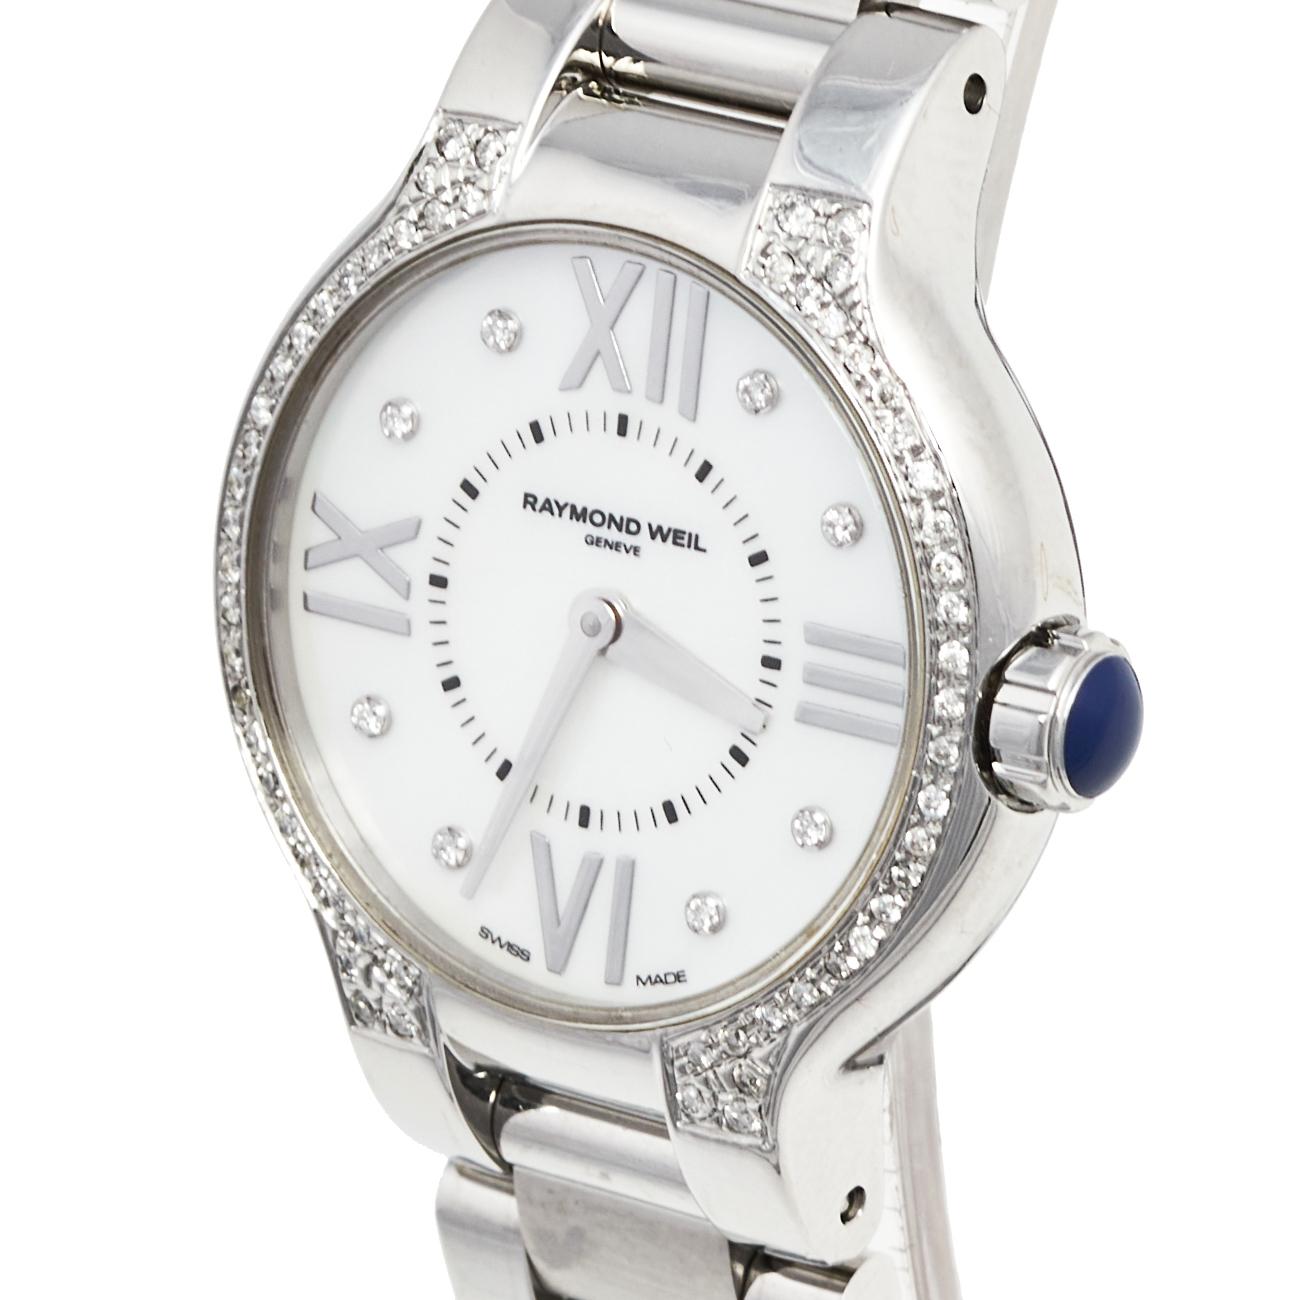 Crafted in glamorous stainless steel, this watch by Raymond Weil is an example of glamour and style. The gorgeous mother of pearl dial is fitted with Roman hour markers at 3, 6, 9, and 12 positions and diamond studs that show perfect time with two